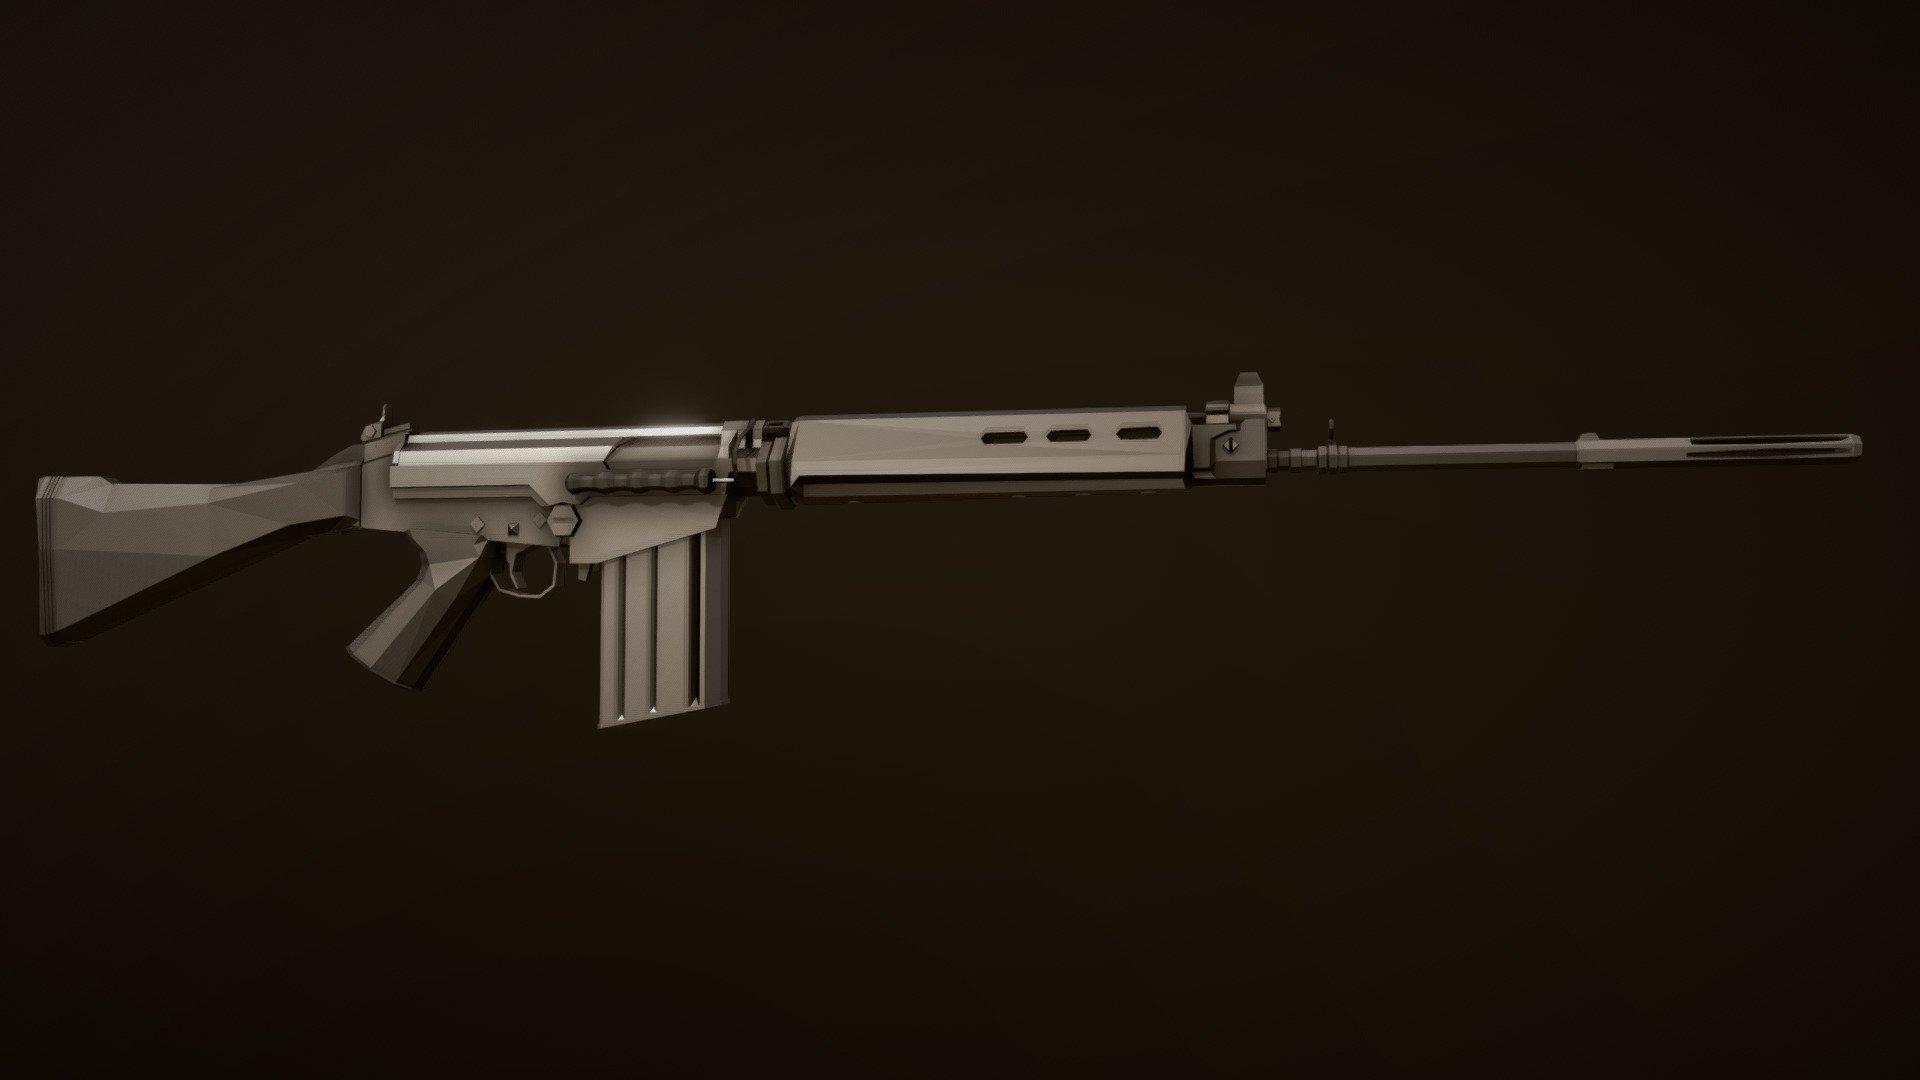 Low-Poly model of an original FN production 50.00 pattern FAL with polymer furniture.

6/11/22:
simplified some geometry, fixed minor error of bolt carrier geometry, fixed some aspects of gas piston/oprod, added magazine follower, moved model of .308 round to different location and added model of casing 3d model